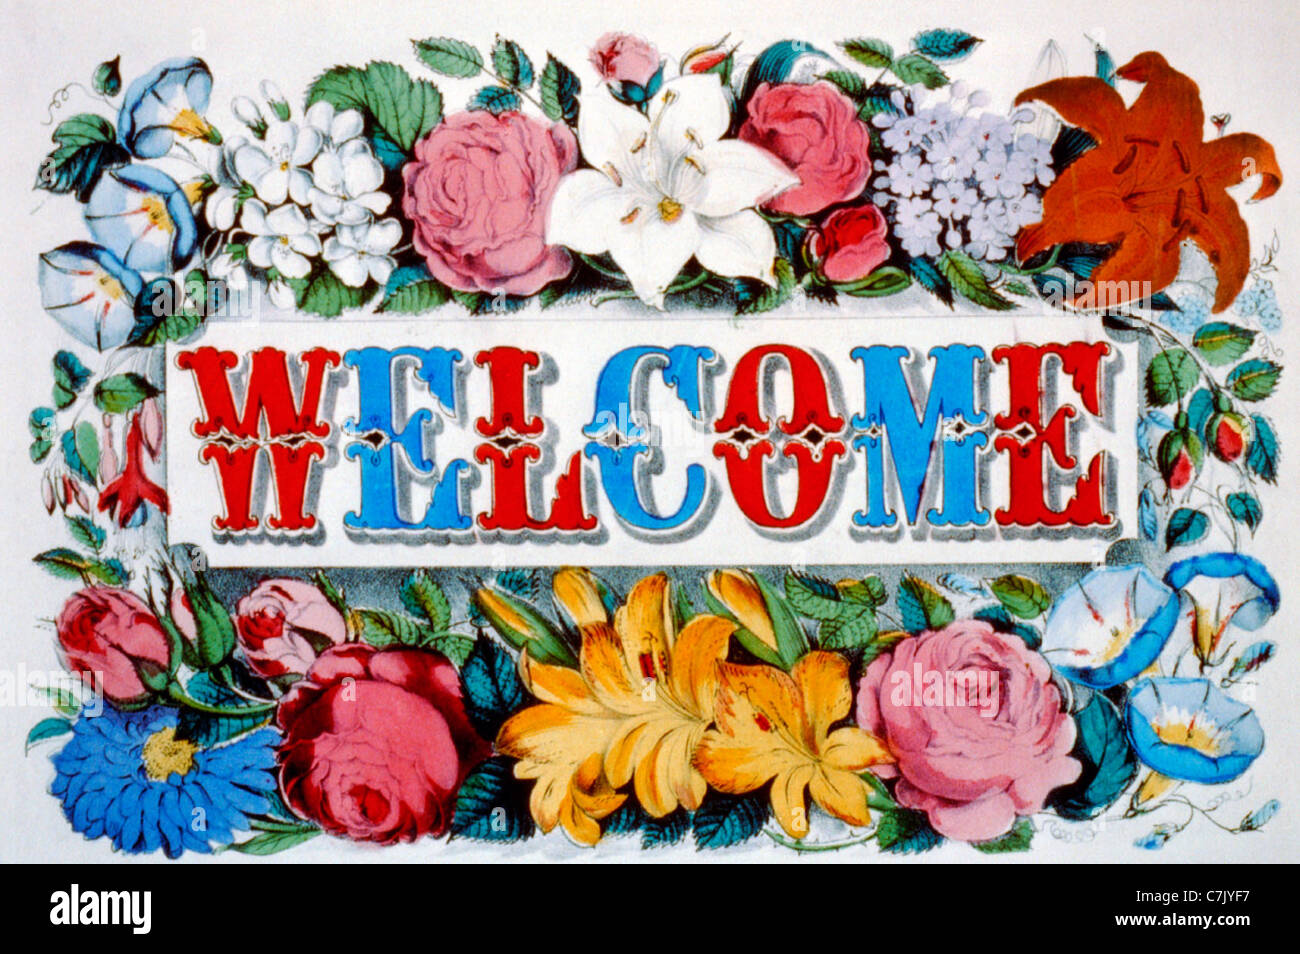 Welcome Illustration Stock Photo